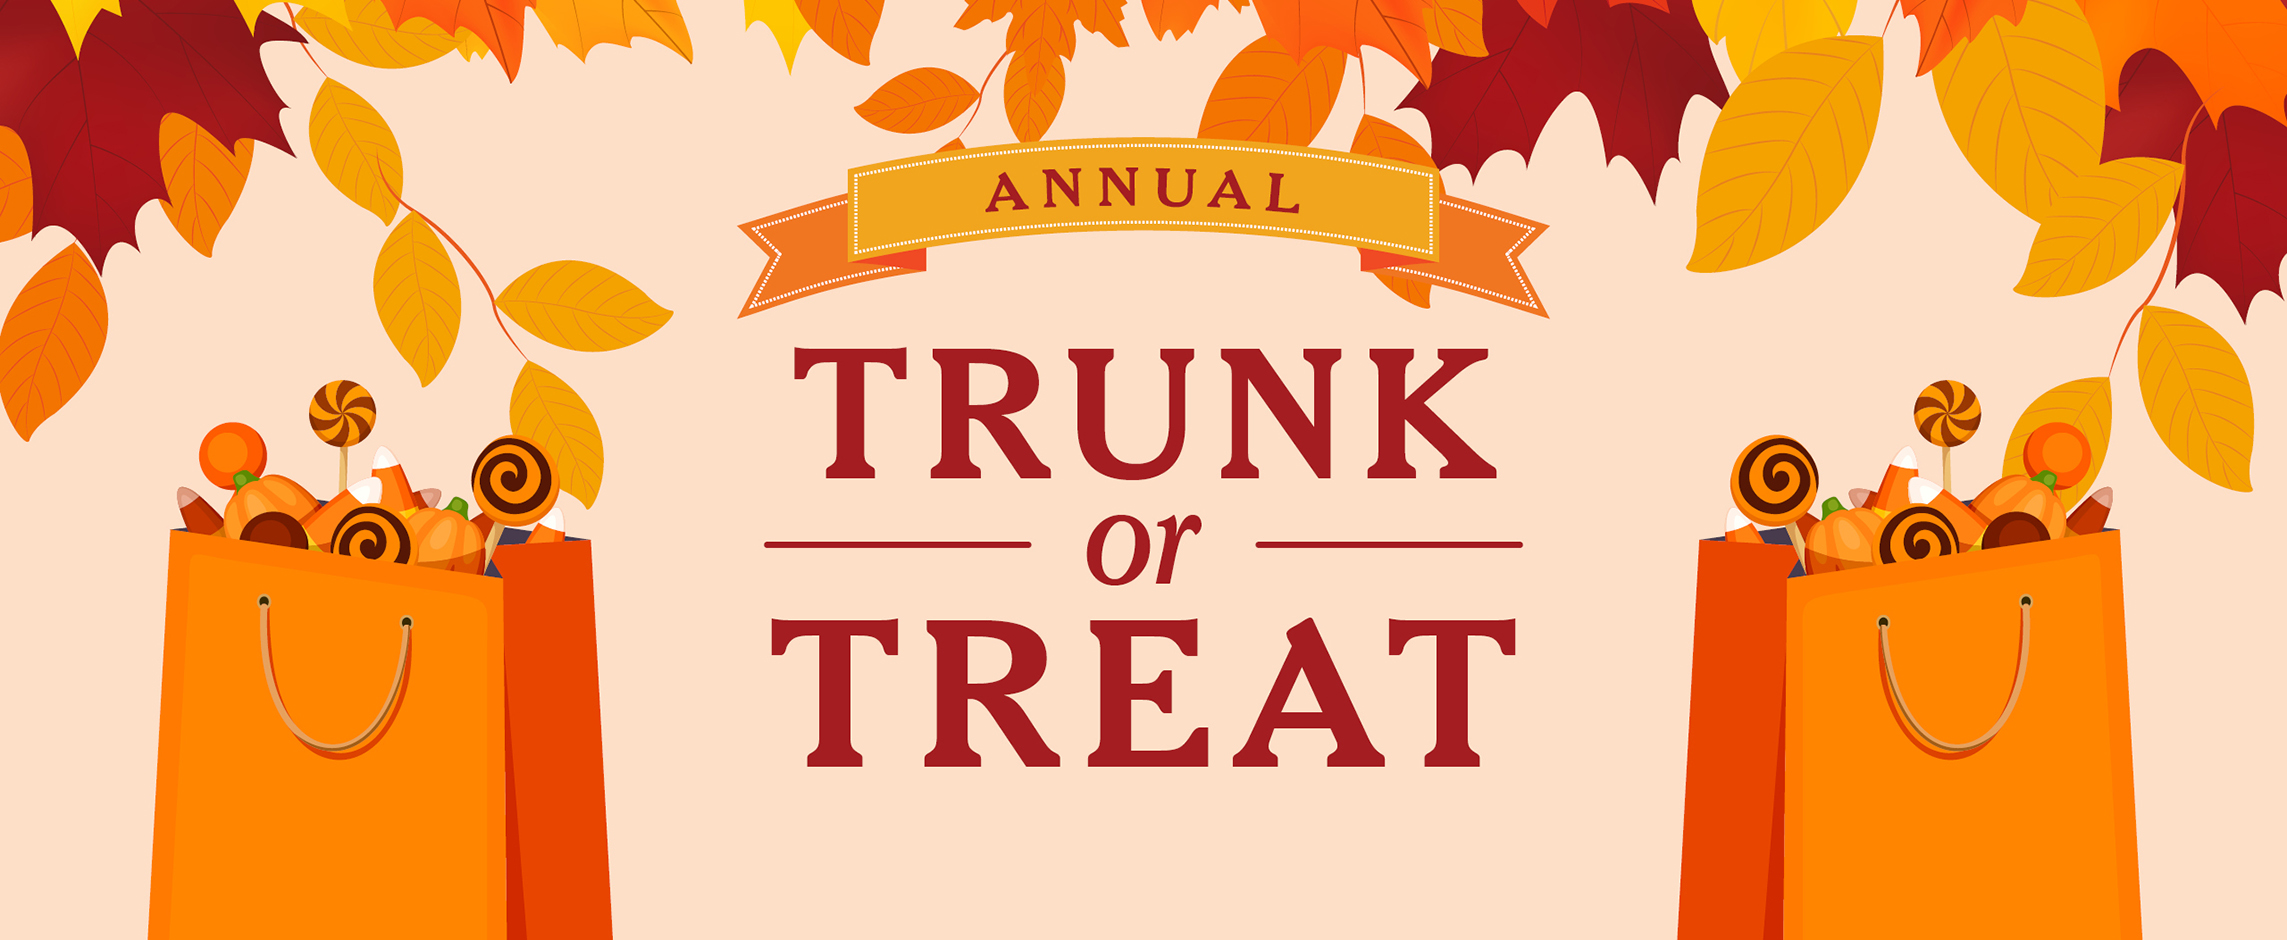 Annual Trunk of Treat